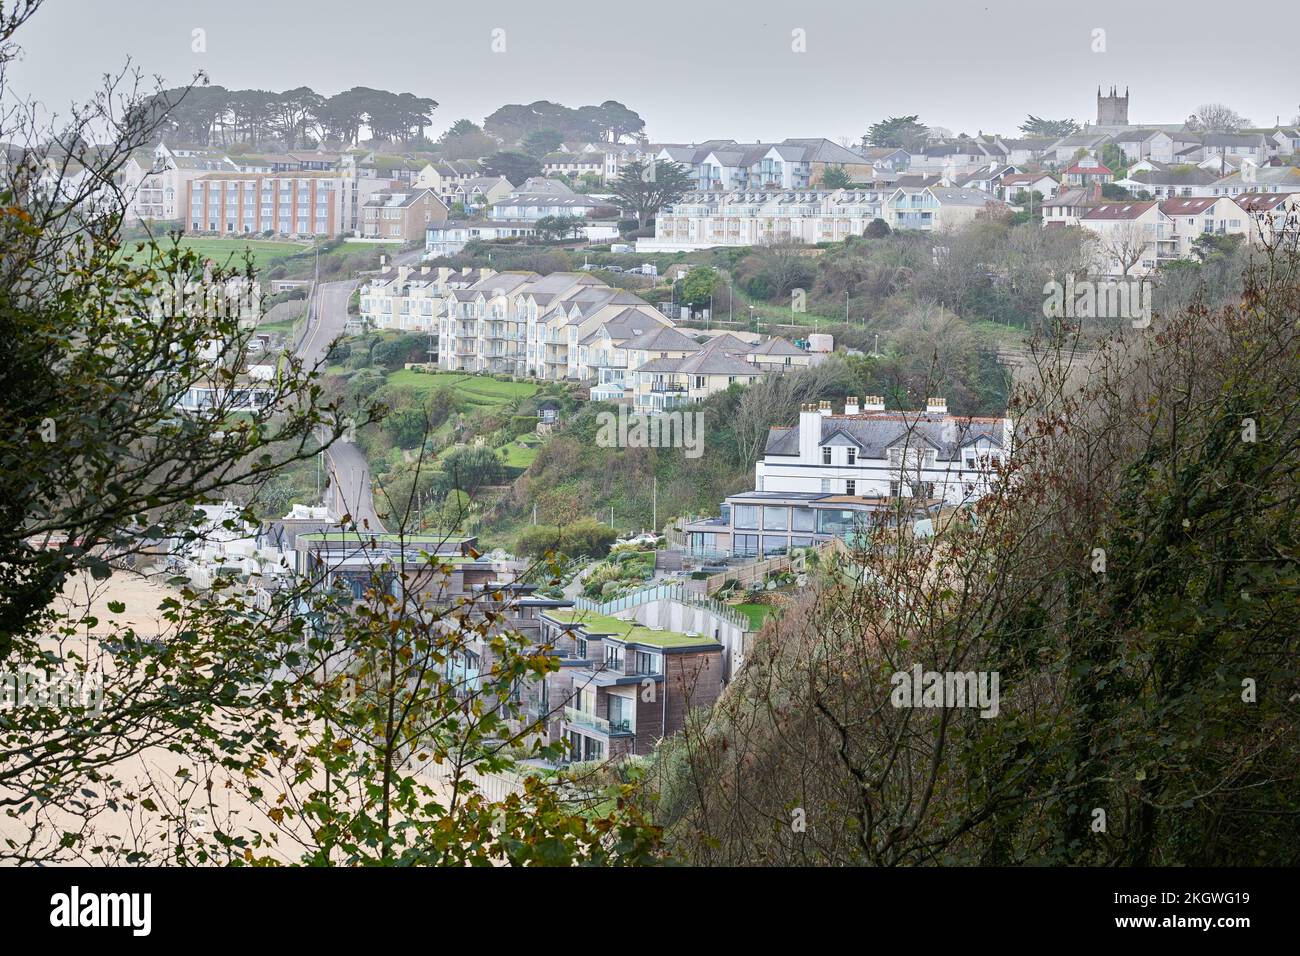 Houses on the cliff side above Carbis Bay (Barrepta Cove), Cornwall, England. Stock Photo